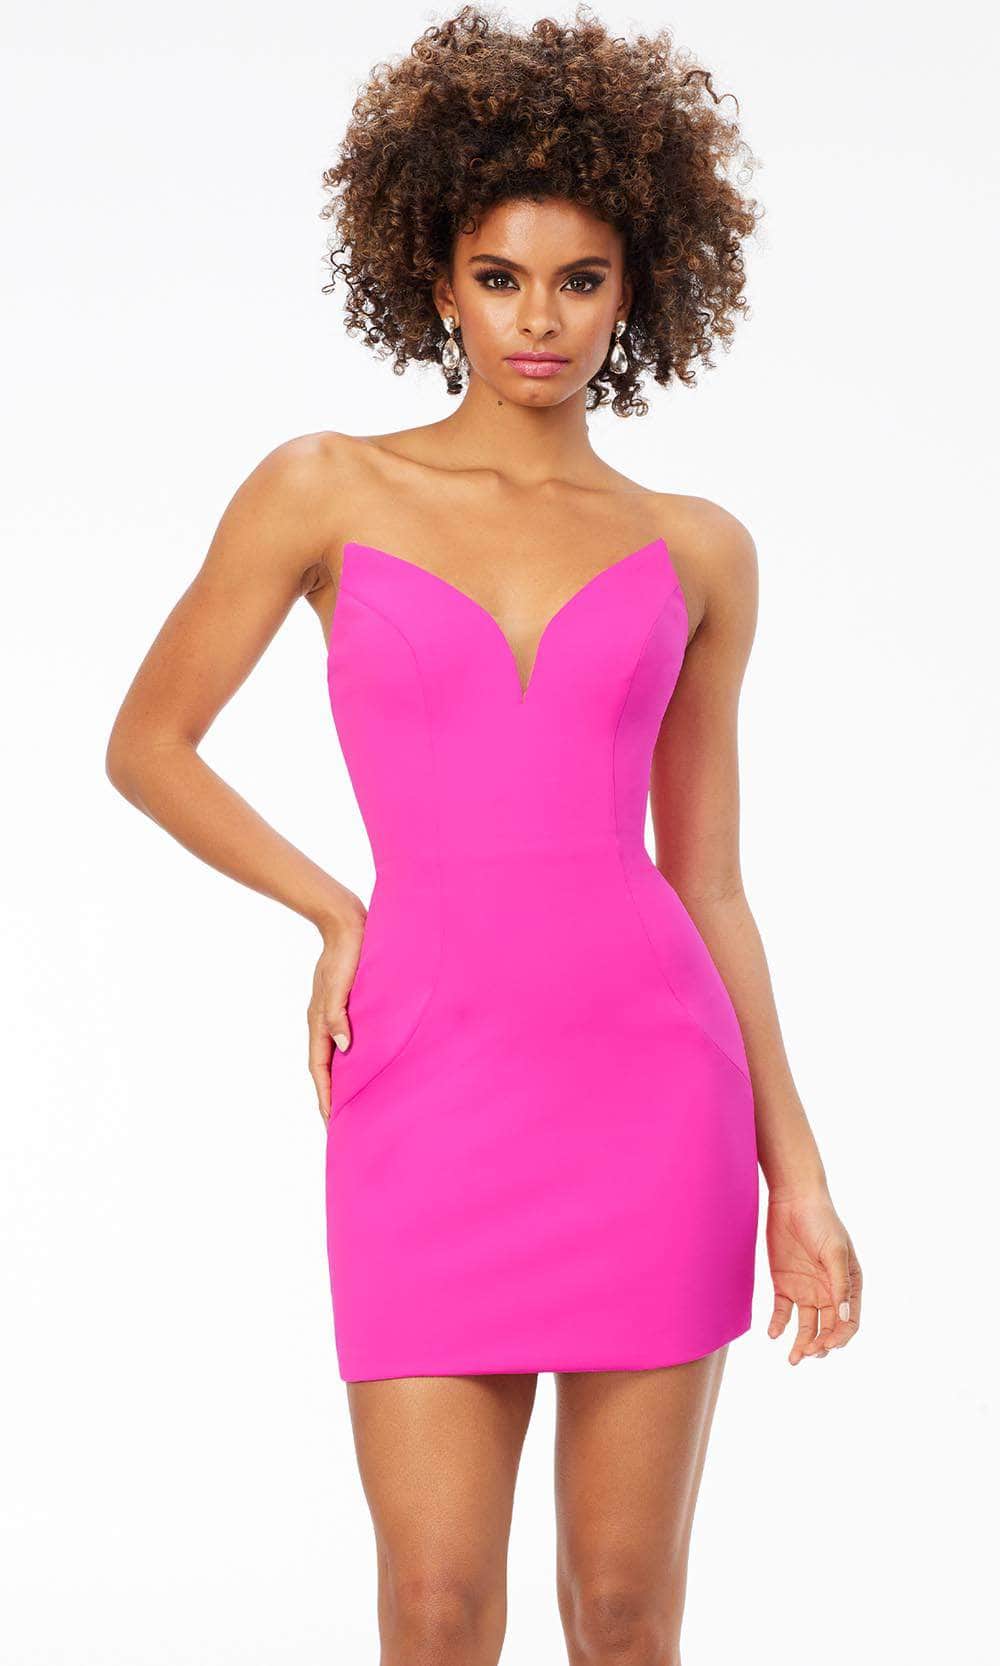 Image of Ashley Lauren 4539 - Edgy Sweetheart Cocktail Dress